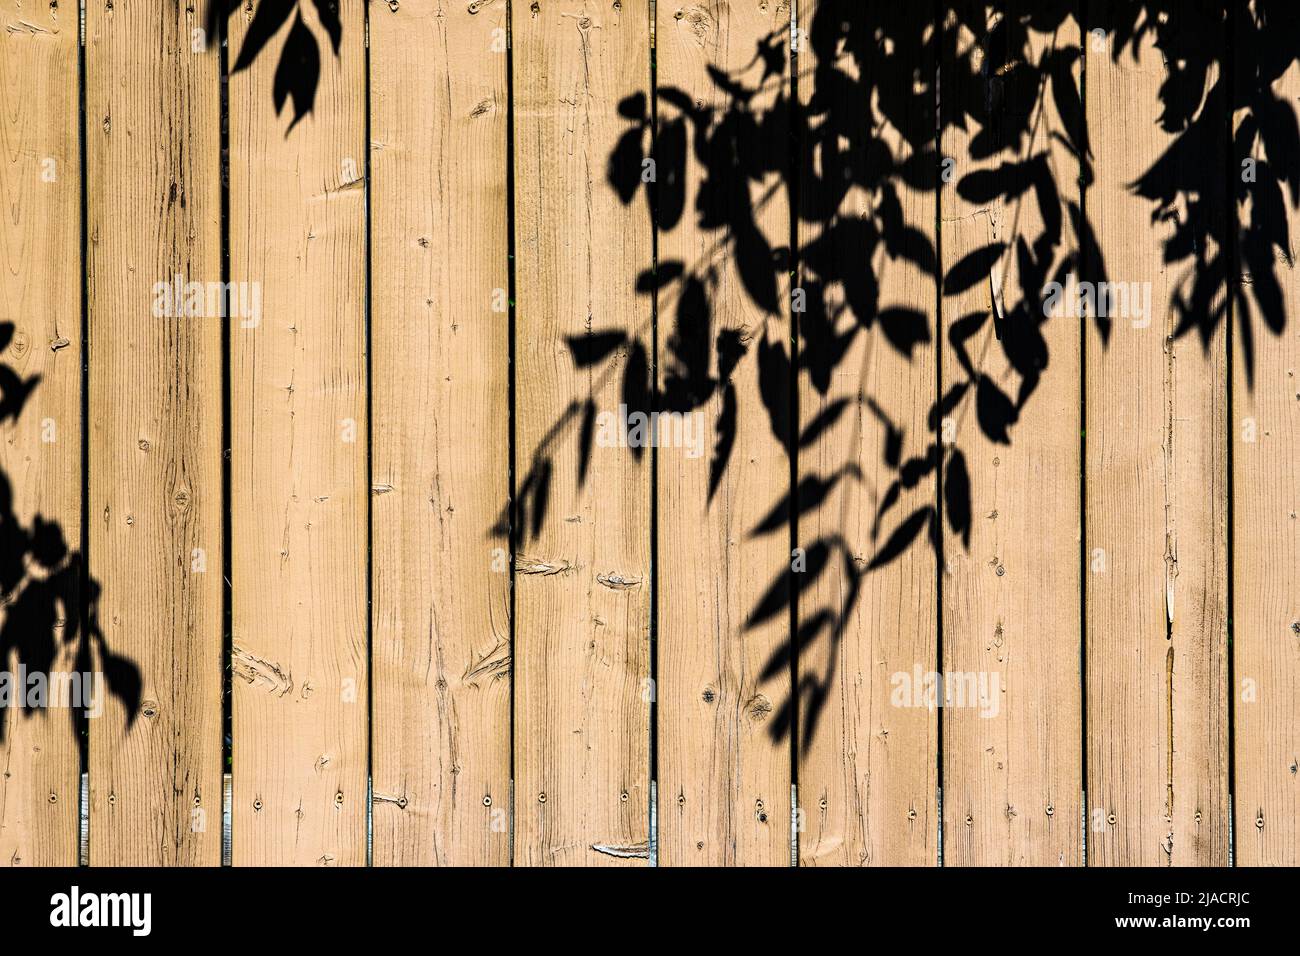 Shadows of leaves of a tree on a wooden fence in a hot summer afternoon, reminder of nostalgia of childhood and good old days- stock photography Stock Photo